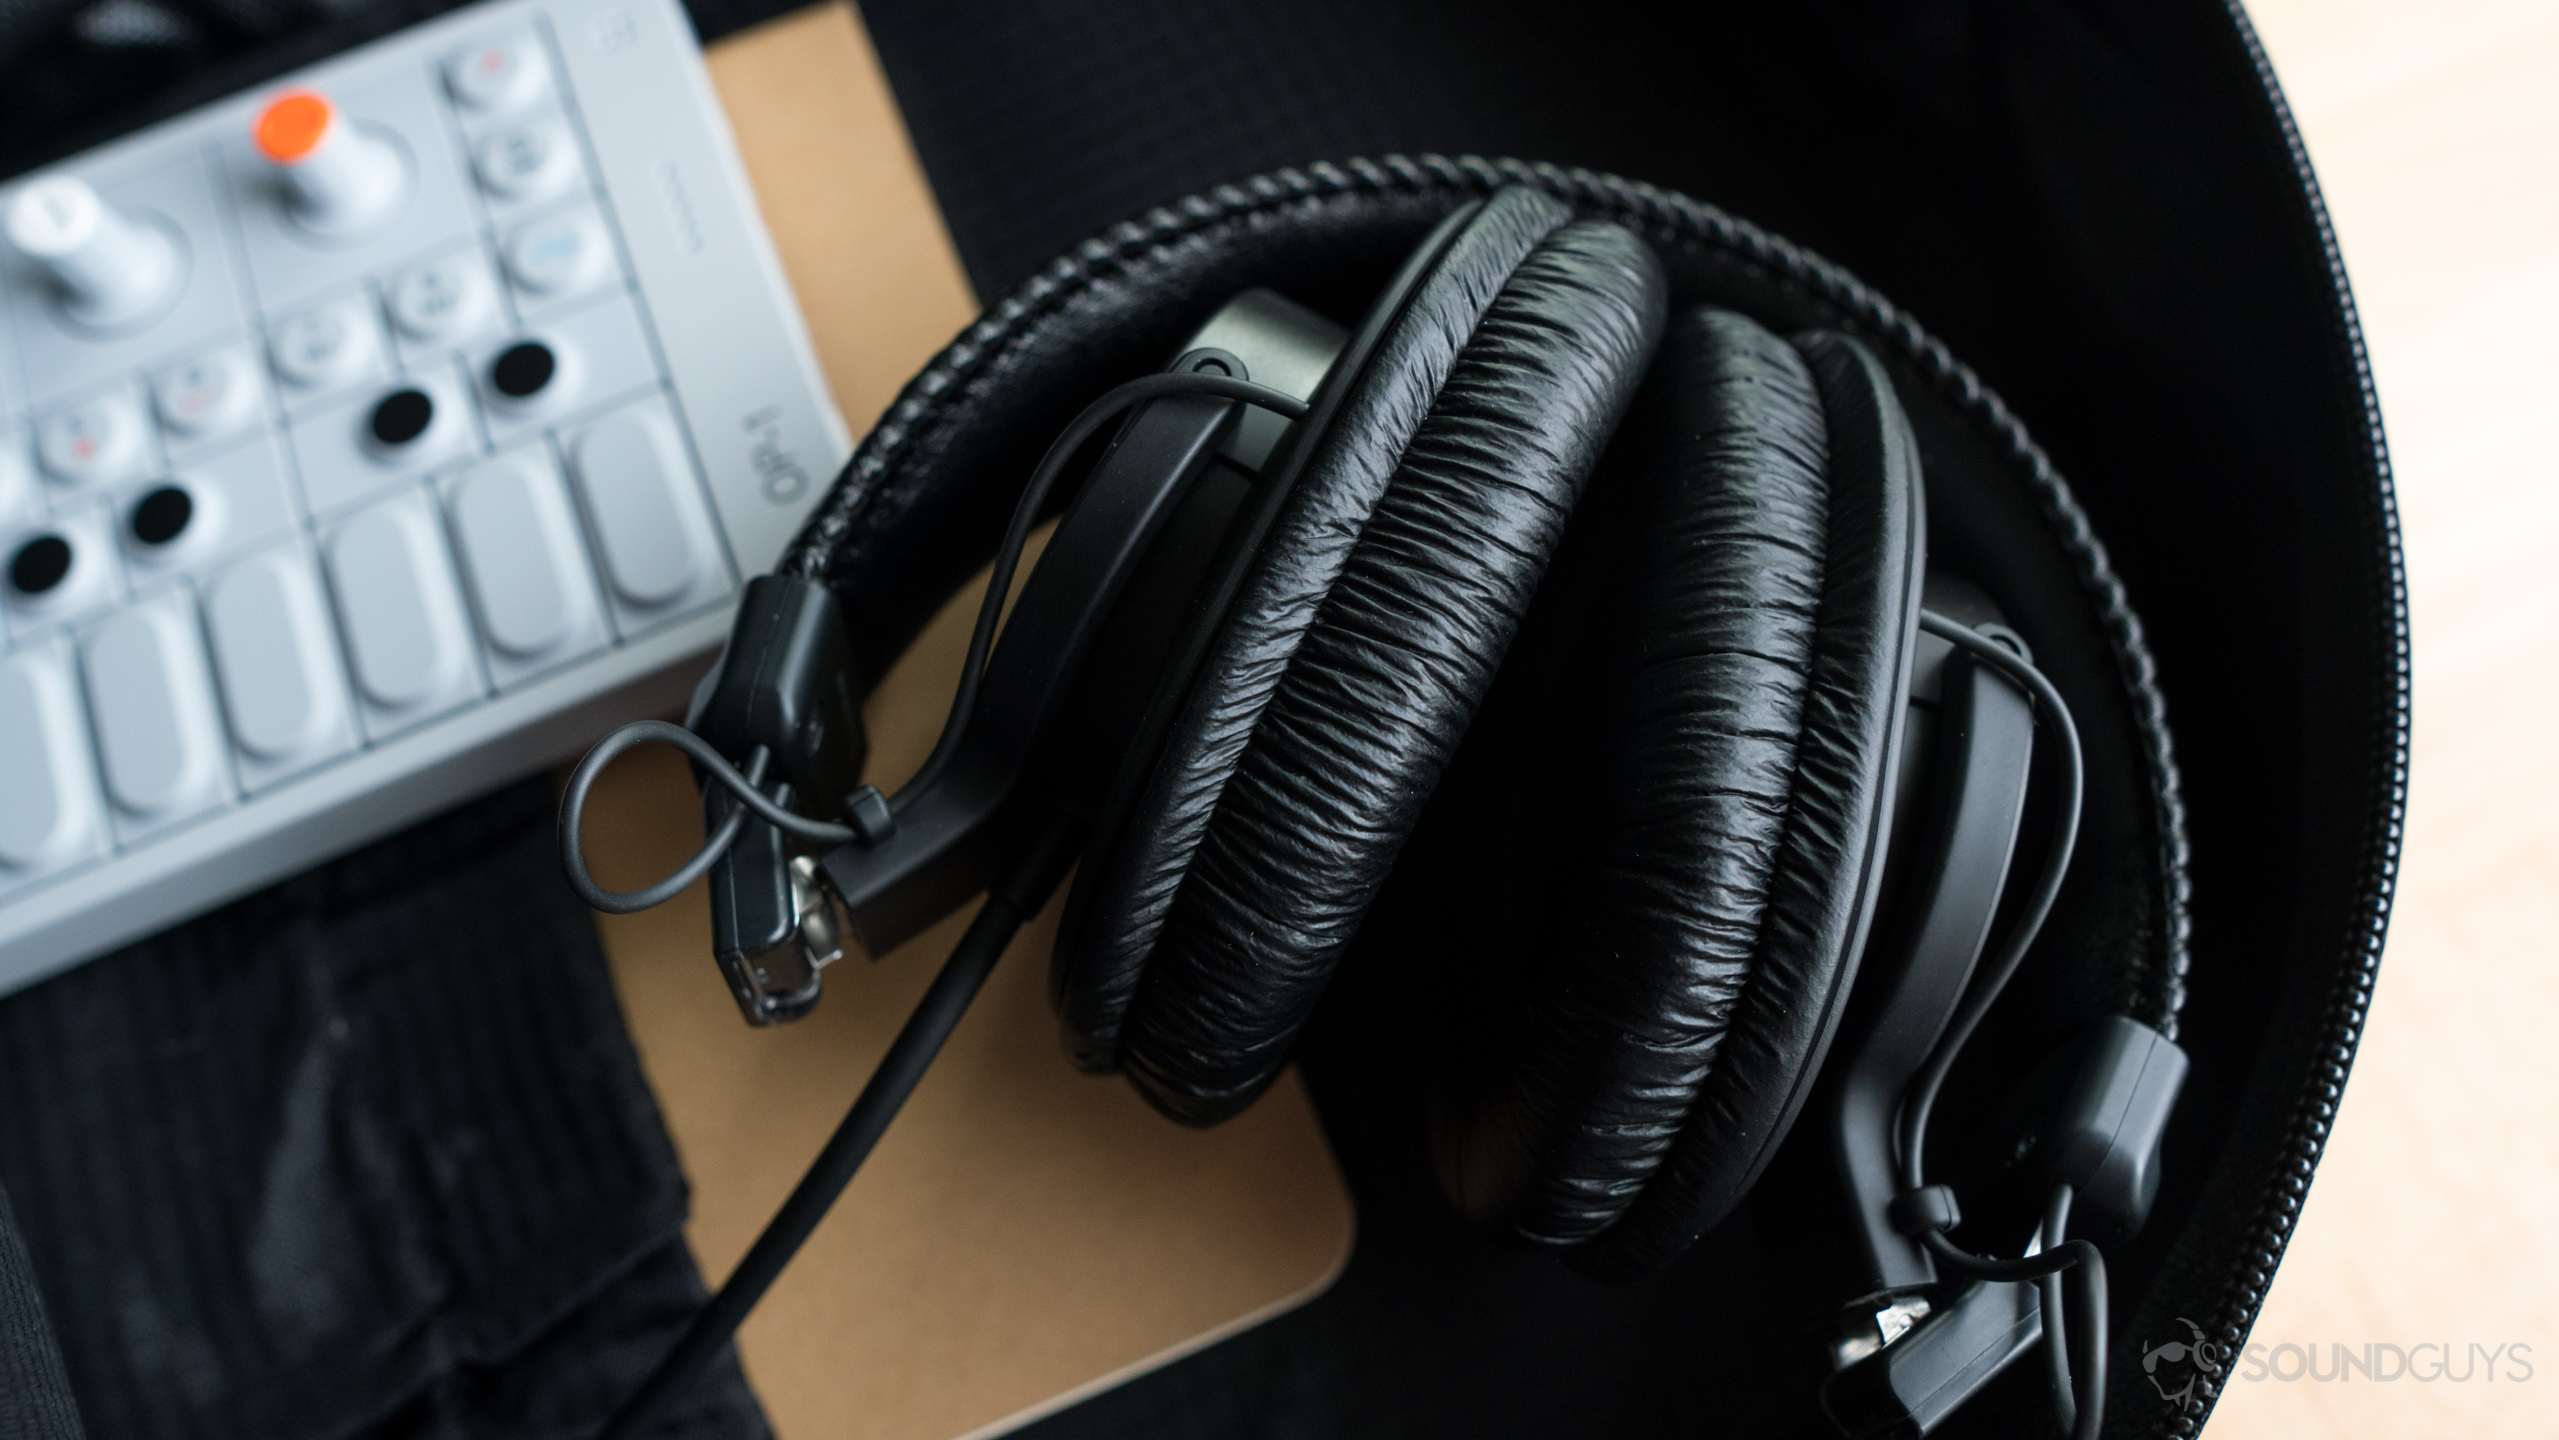 The MDR-7506 headphones folded up in a backpack.